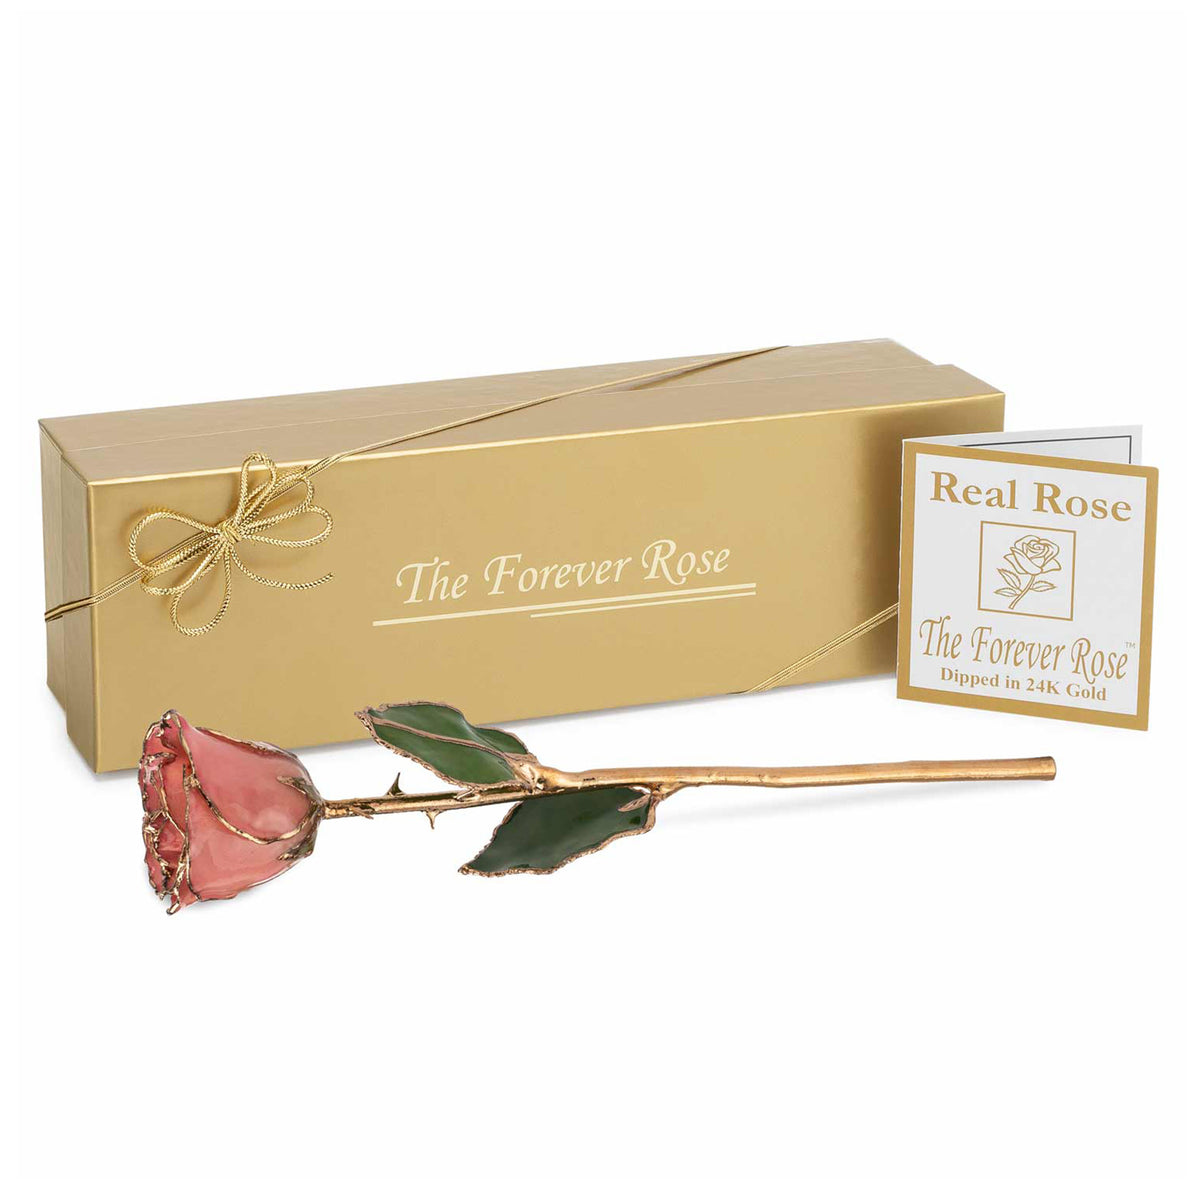 24K Gold Trimmed Forever Rose with Pink Petals. View of Stem, Leaves, and Rose Petals and Showing Detail of Gold Trim shown with gold gift box and certificate of authenticity